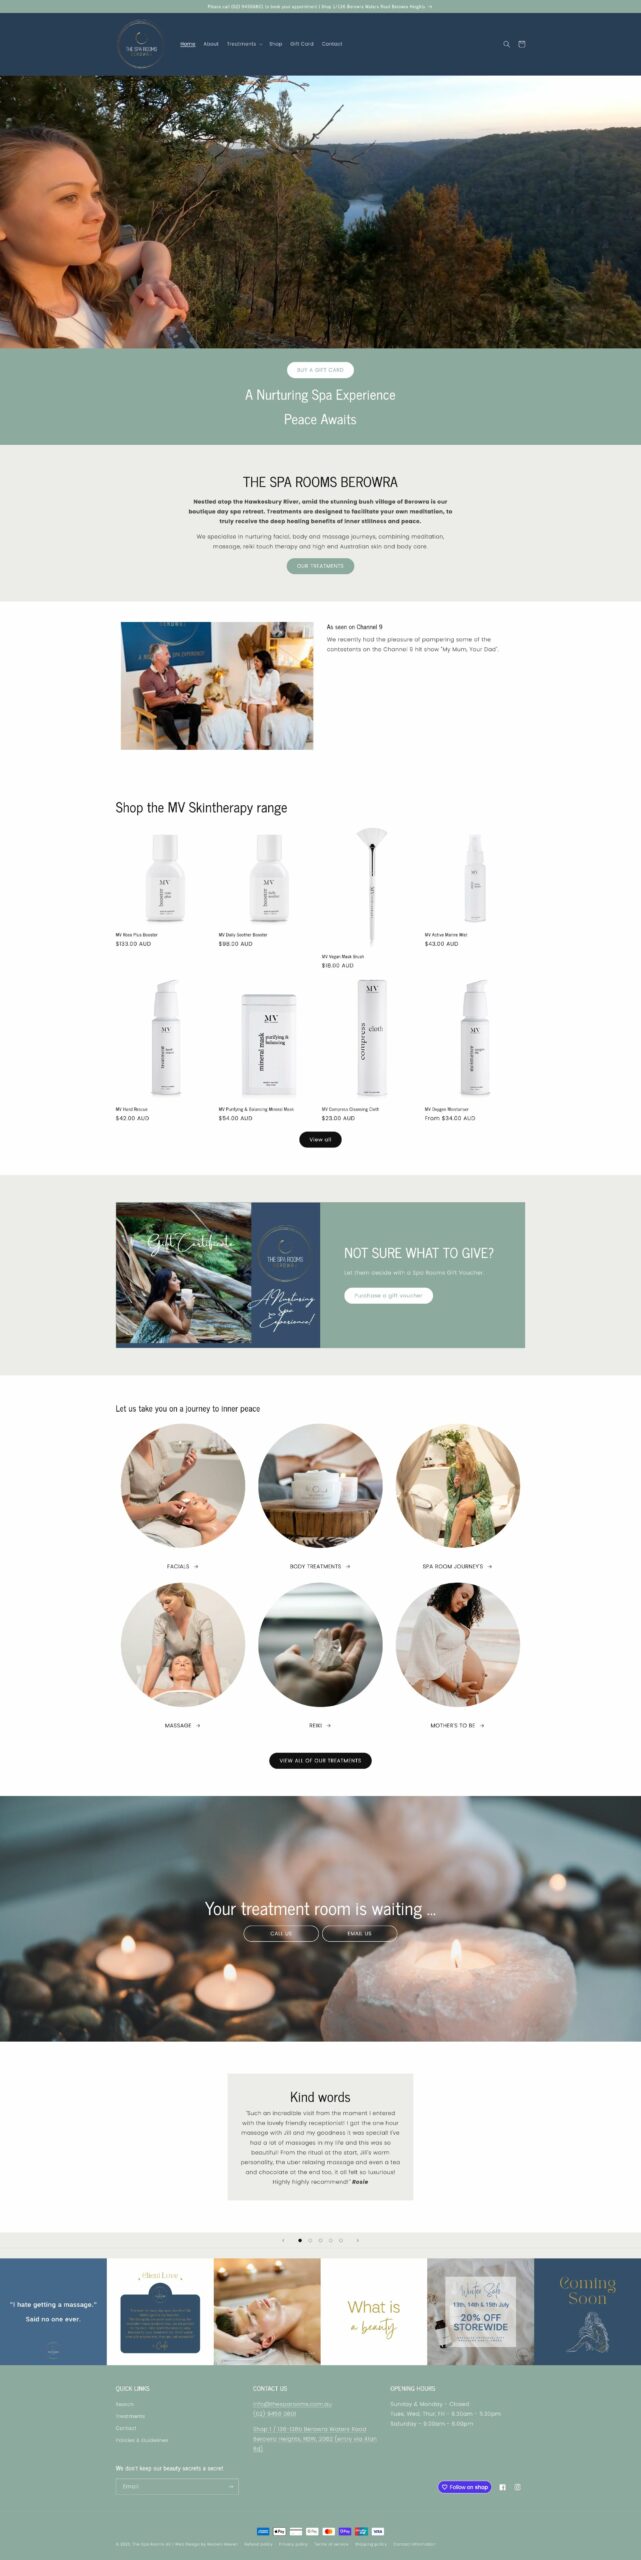 web design the spa rooms shopify day spa berowra facials massage